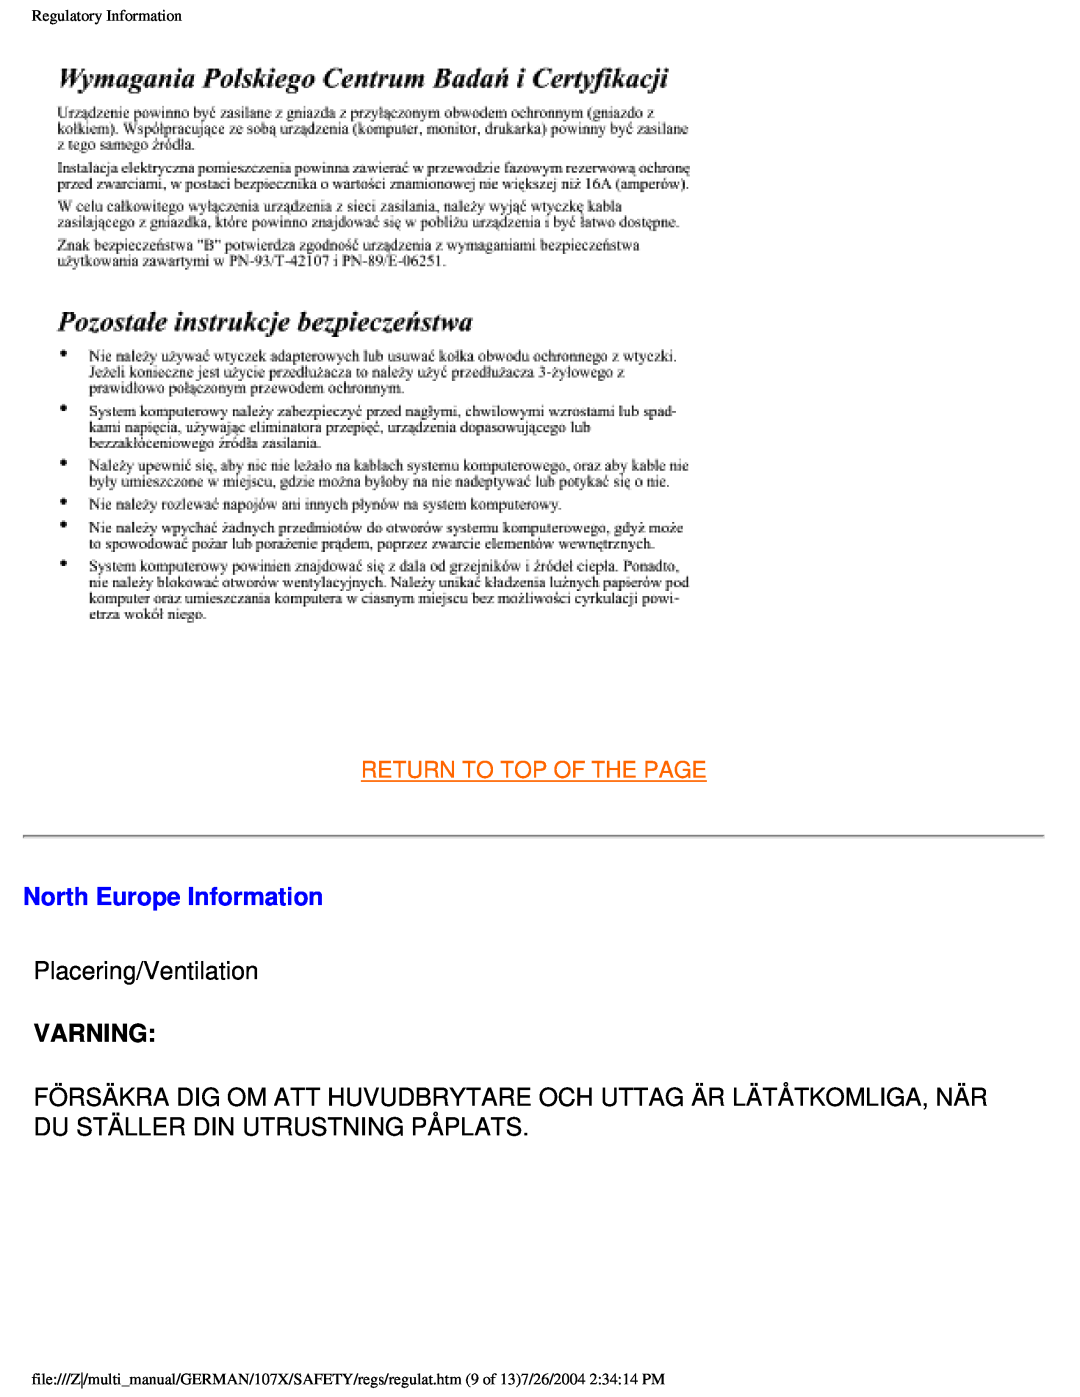 Philips 107X2 user manual North Europe Information, Varning, Return To Top Of The Page, Regulatory Information 